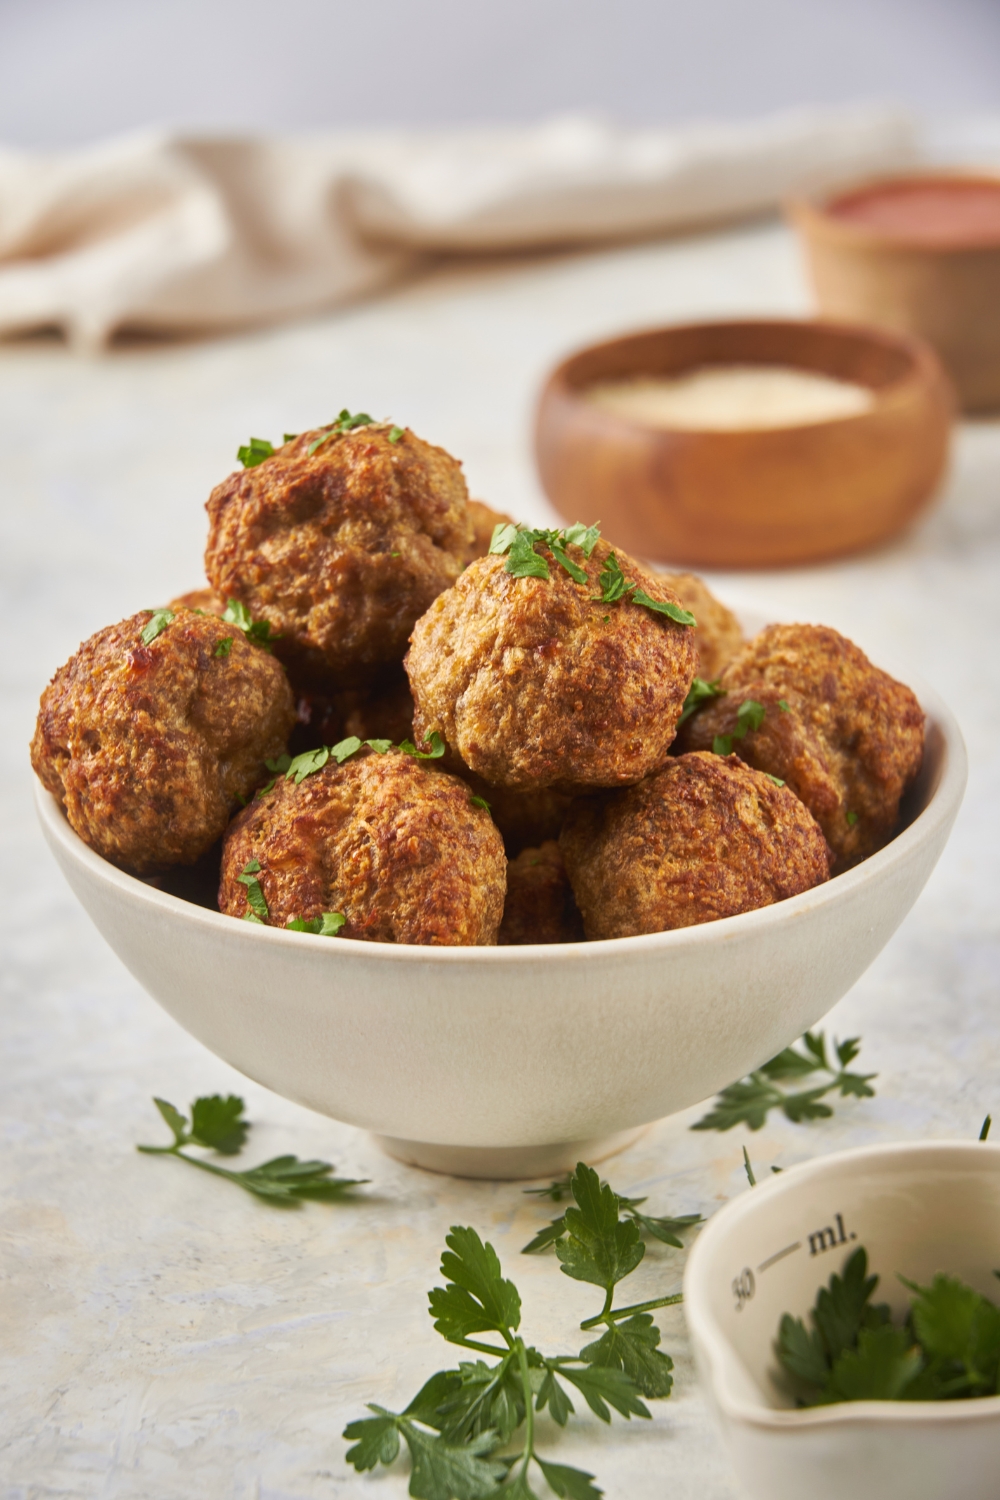 A bowl filled with baked meatballs that have been garnished with fresh green herbs, some of which are sprinkled around the counter.